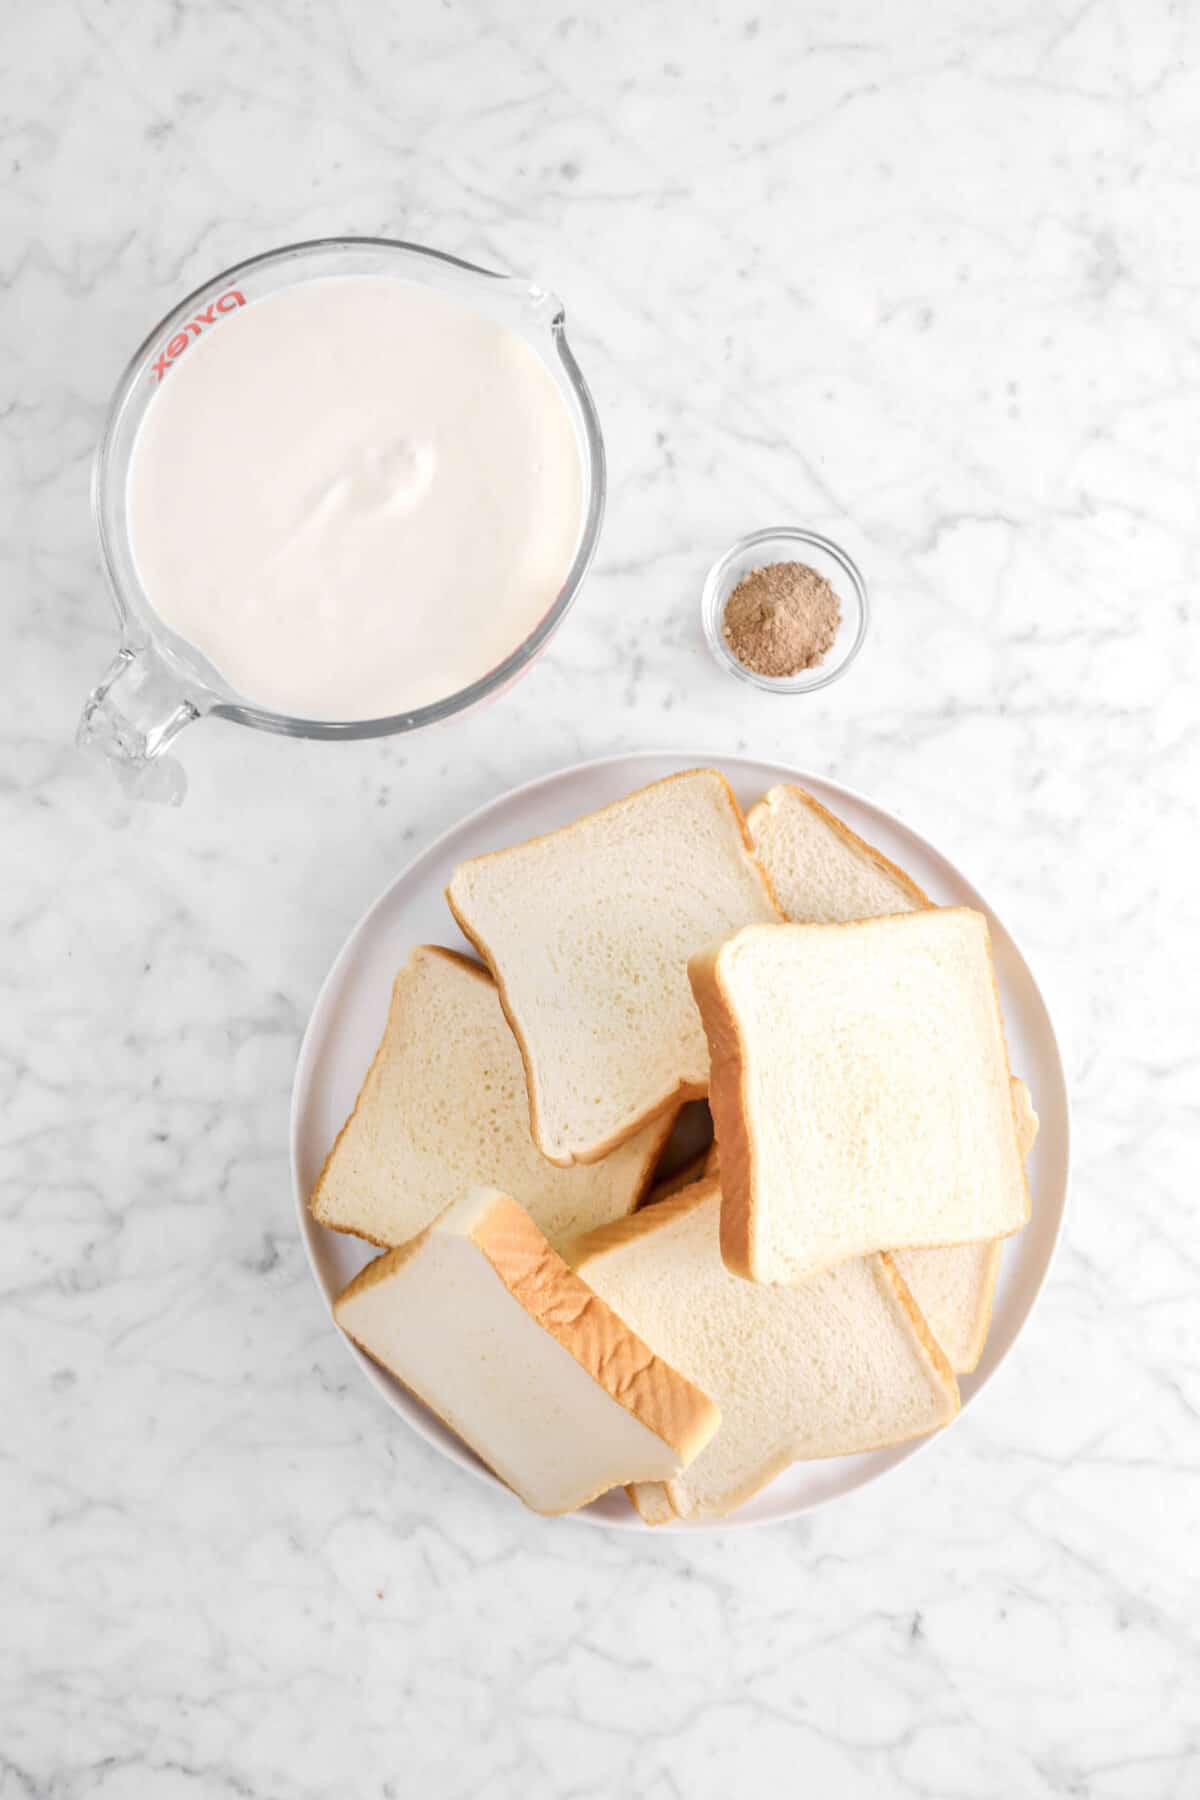 eggnog, nutmeg, and toast slices on marble counter